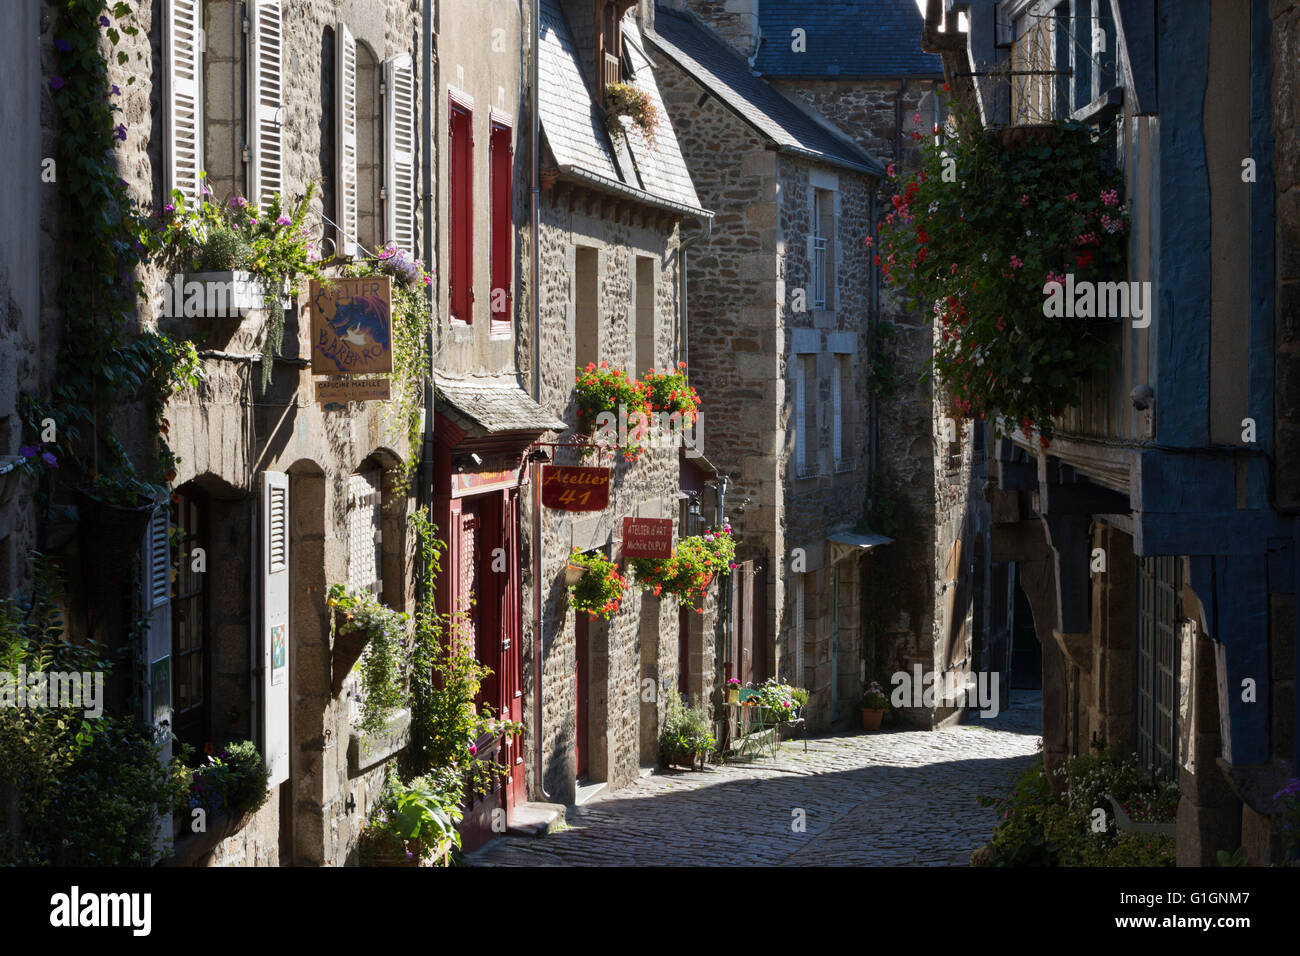 Cobbled street and typical Breton stone houses, Rue du Petit Four, Dinan, Cotes d'Armor, Brittany, France, Europe Stock Photo